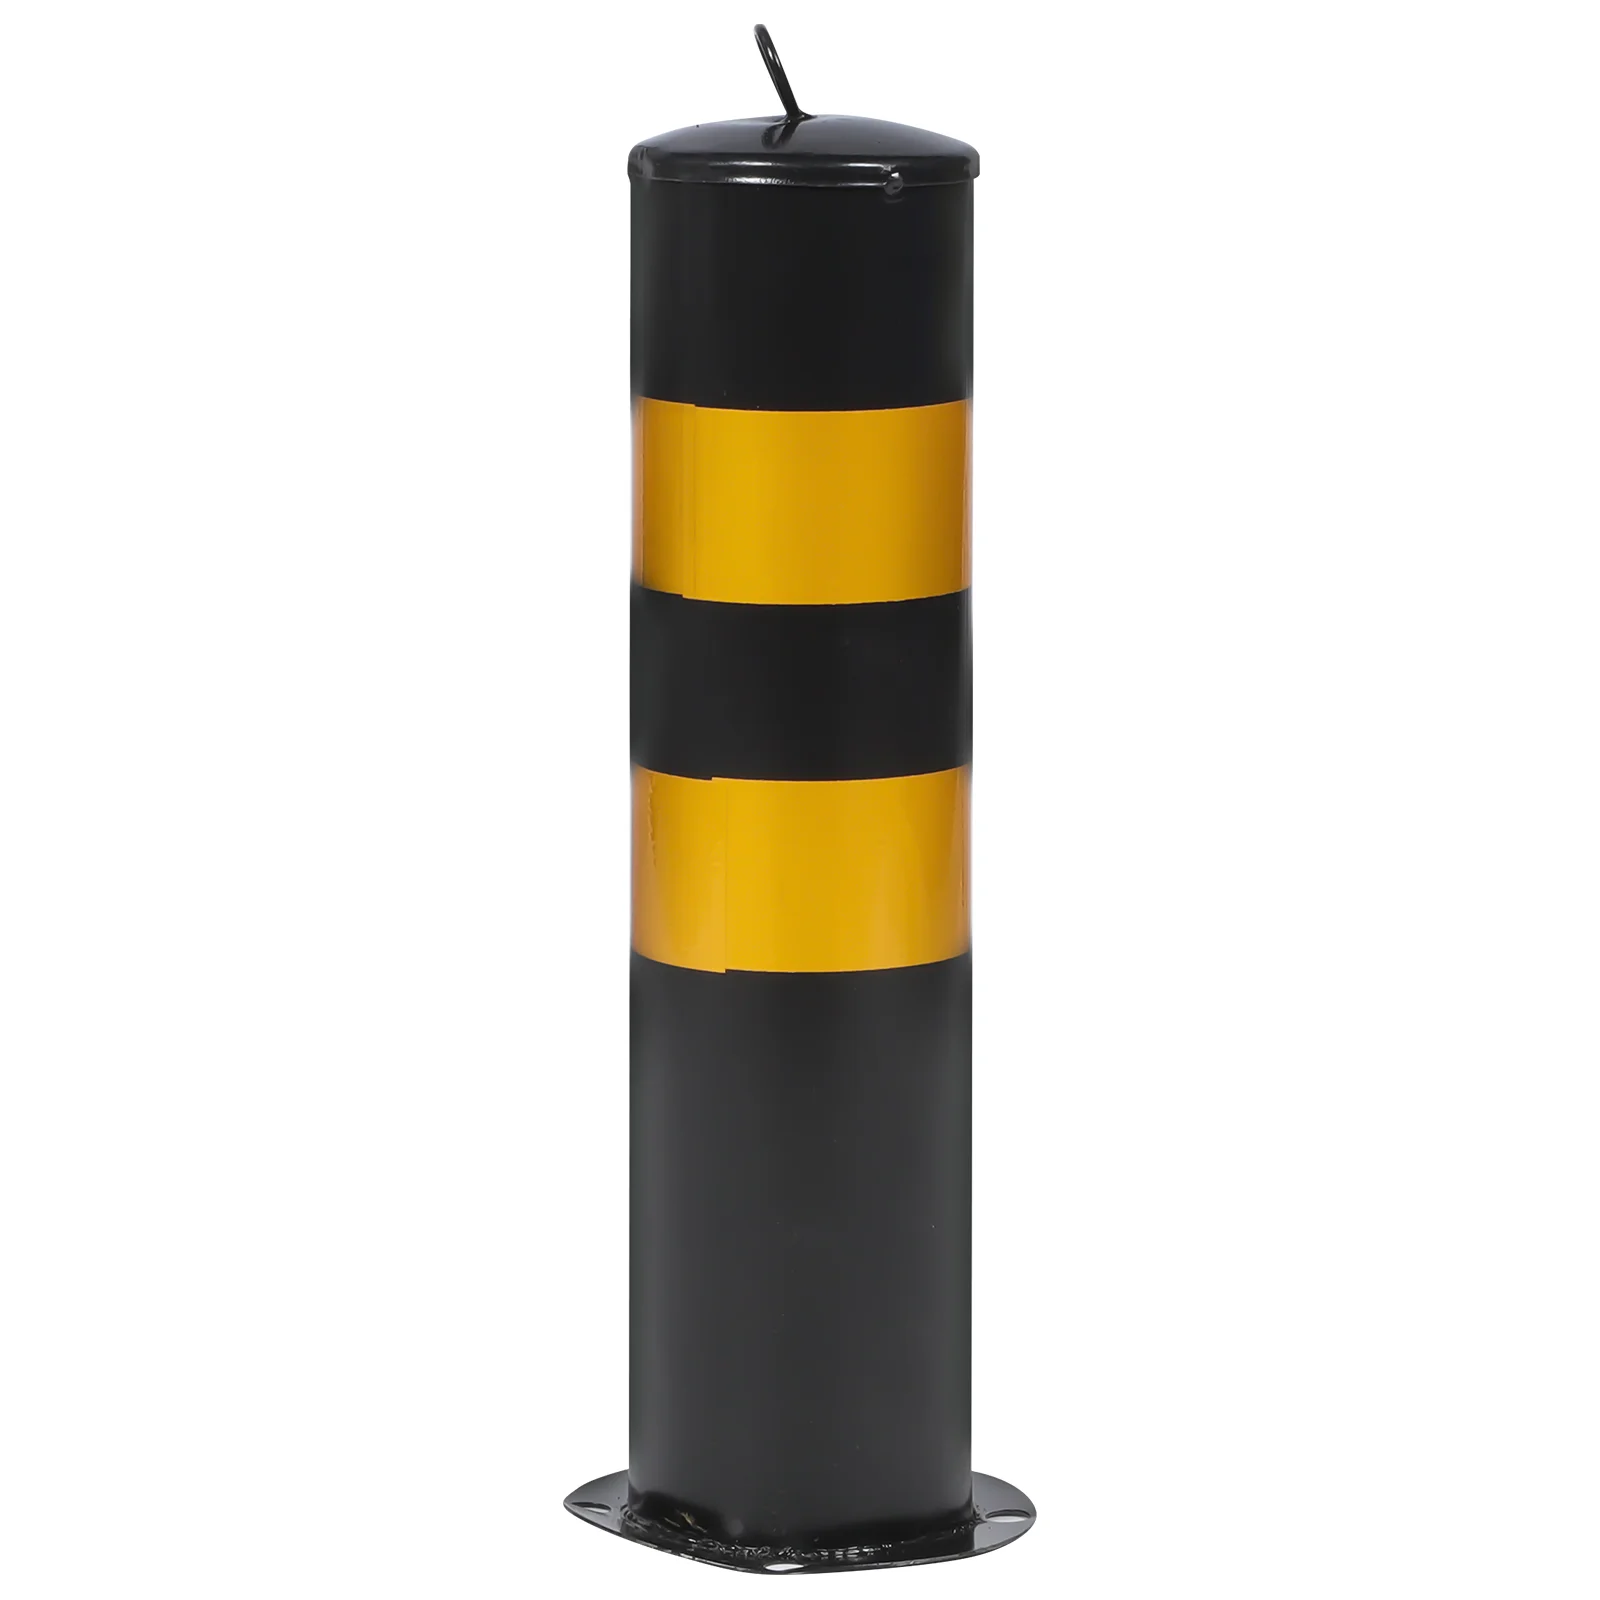 

Warning Post Barricades Construction Cones Driveway Security Barrier Parking Bollards Traffic Safety Column Metal Fence Road